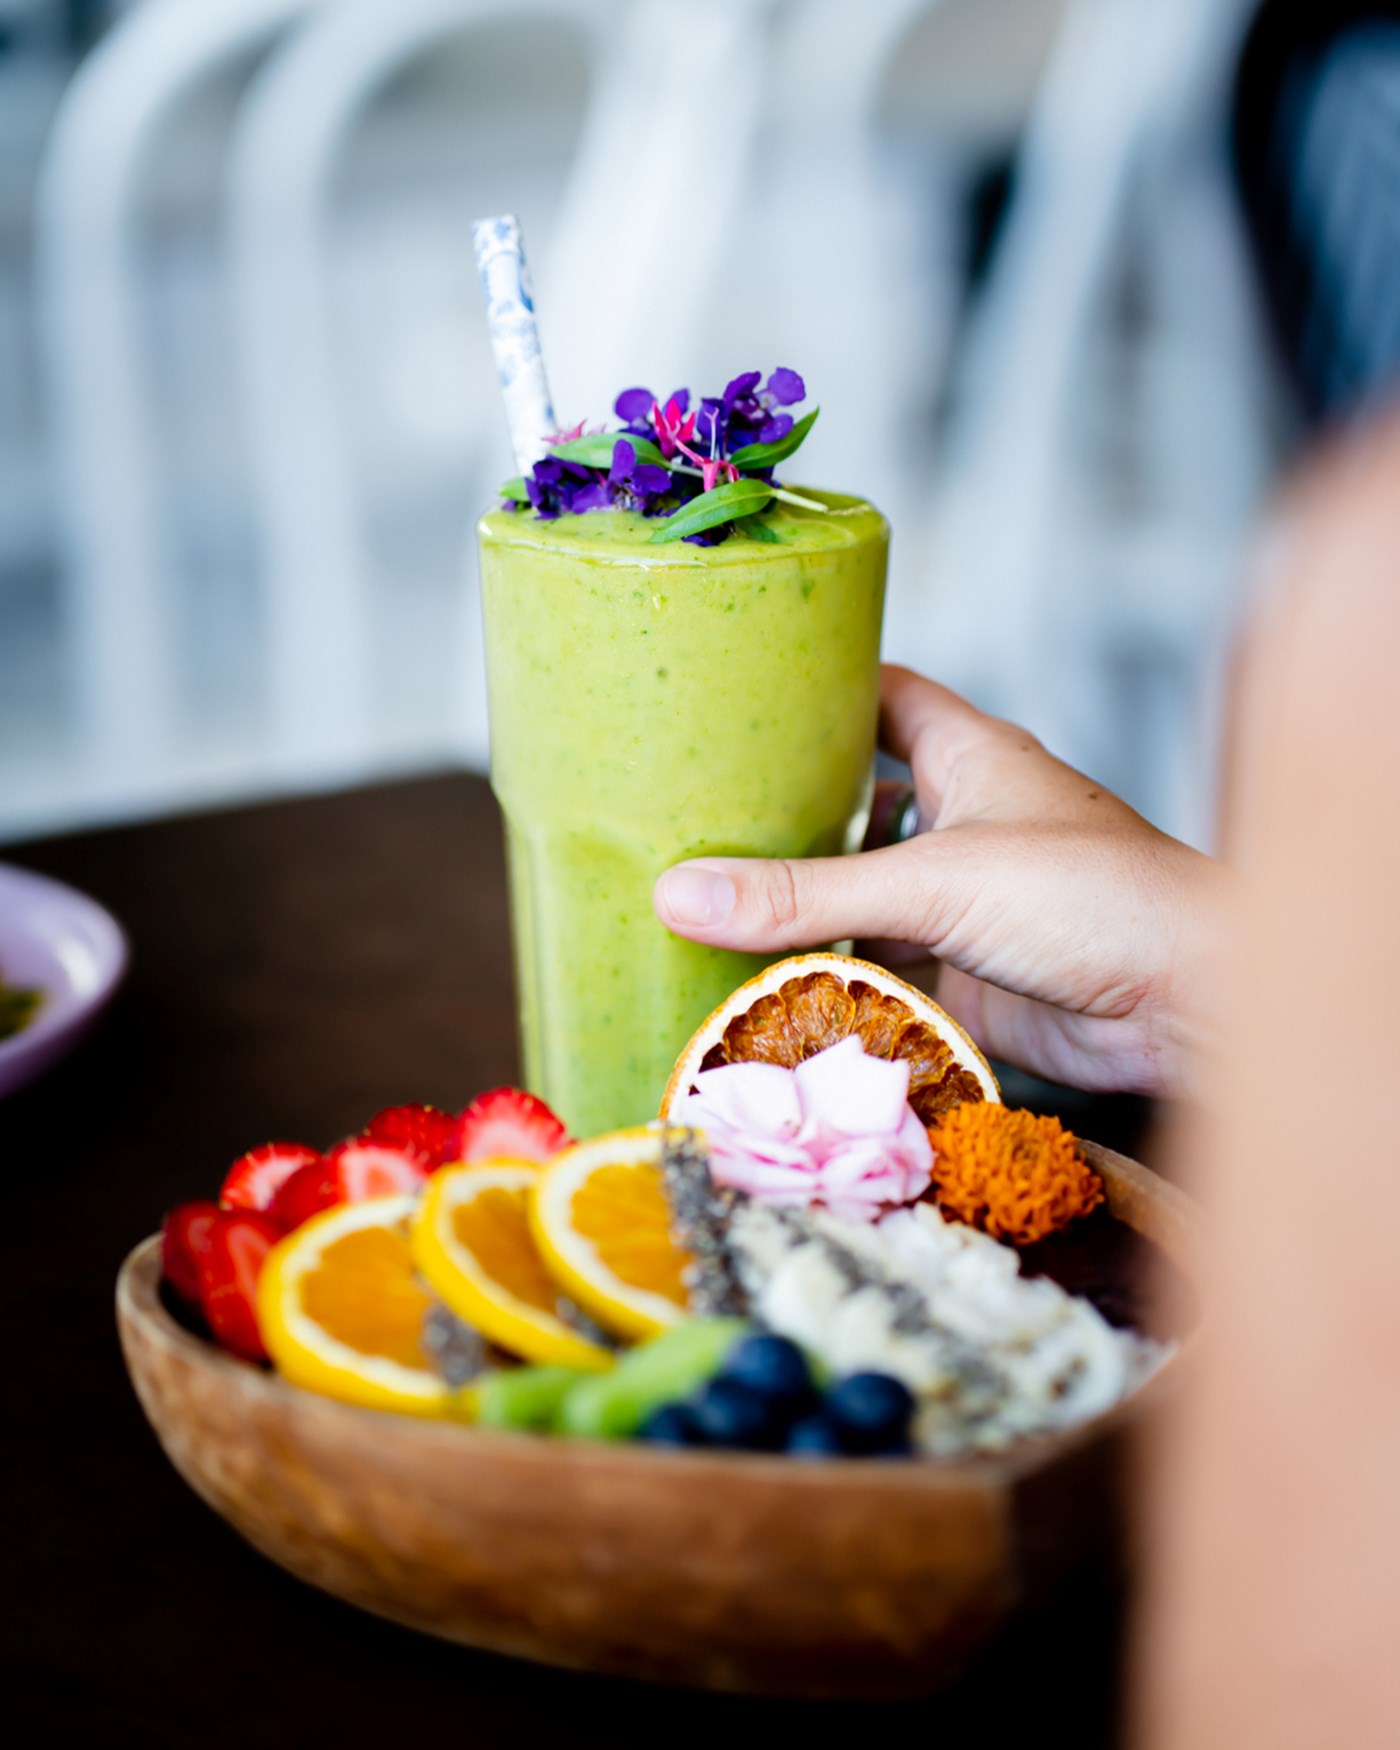 Acai fruit bowl and a green juice on a brown table